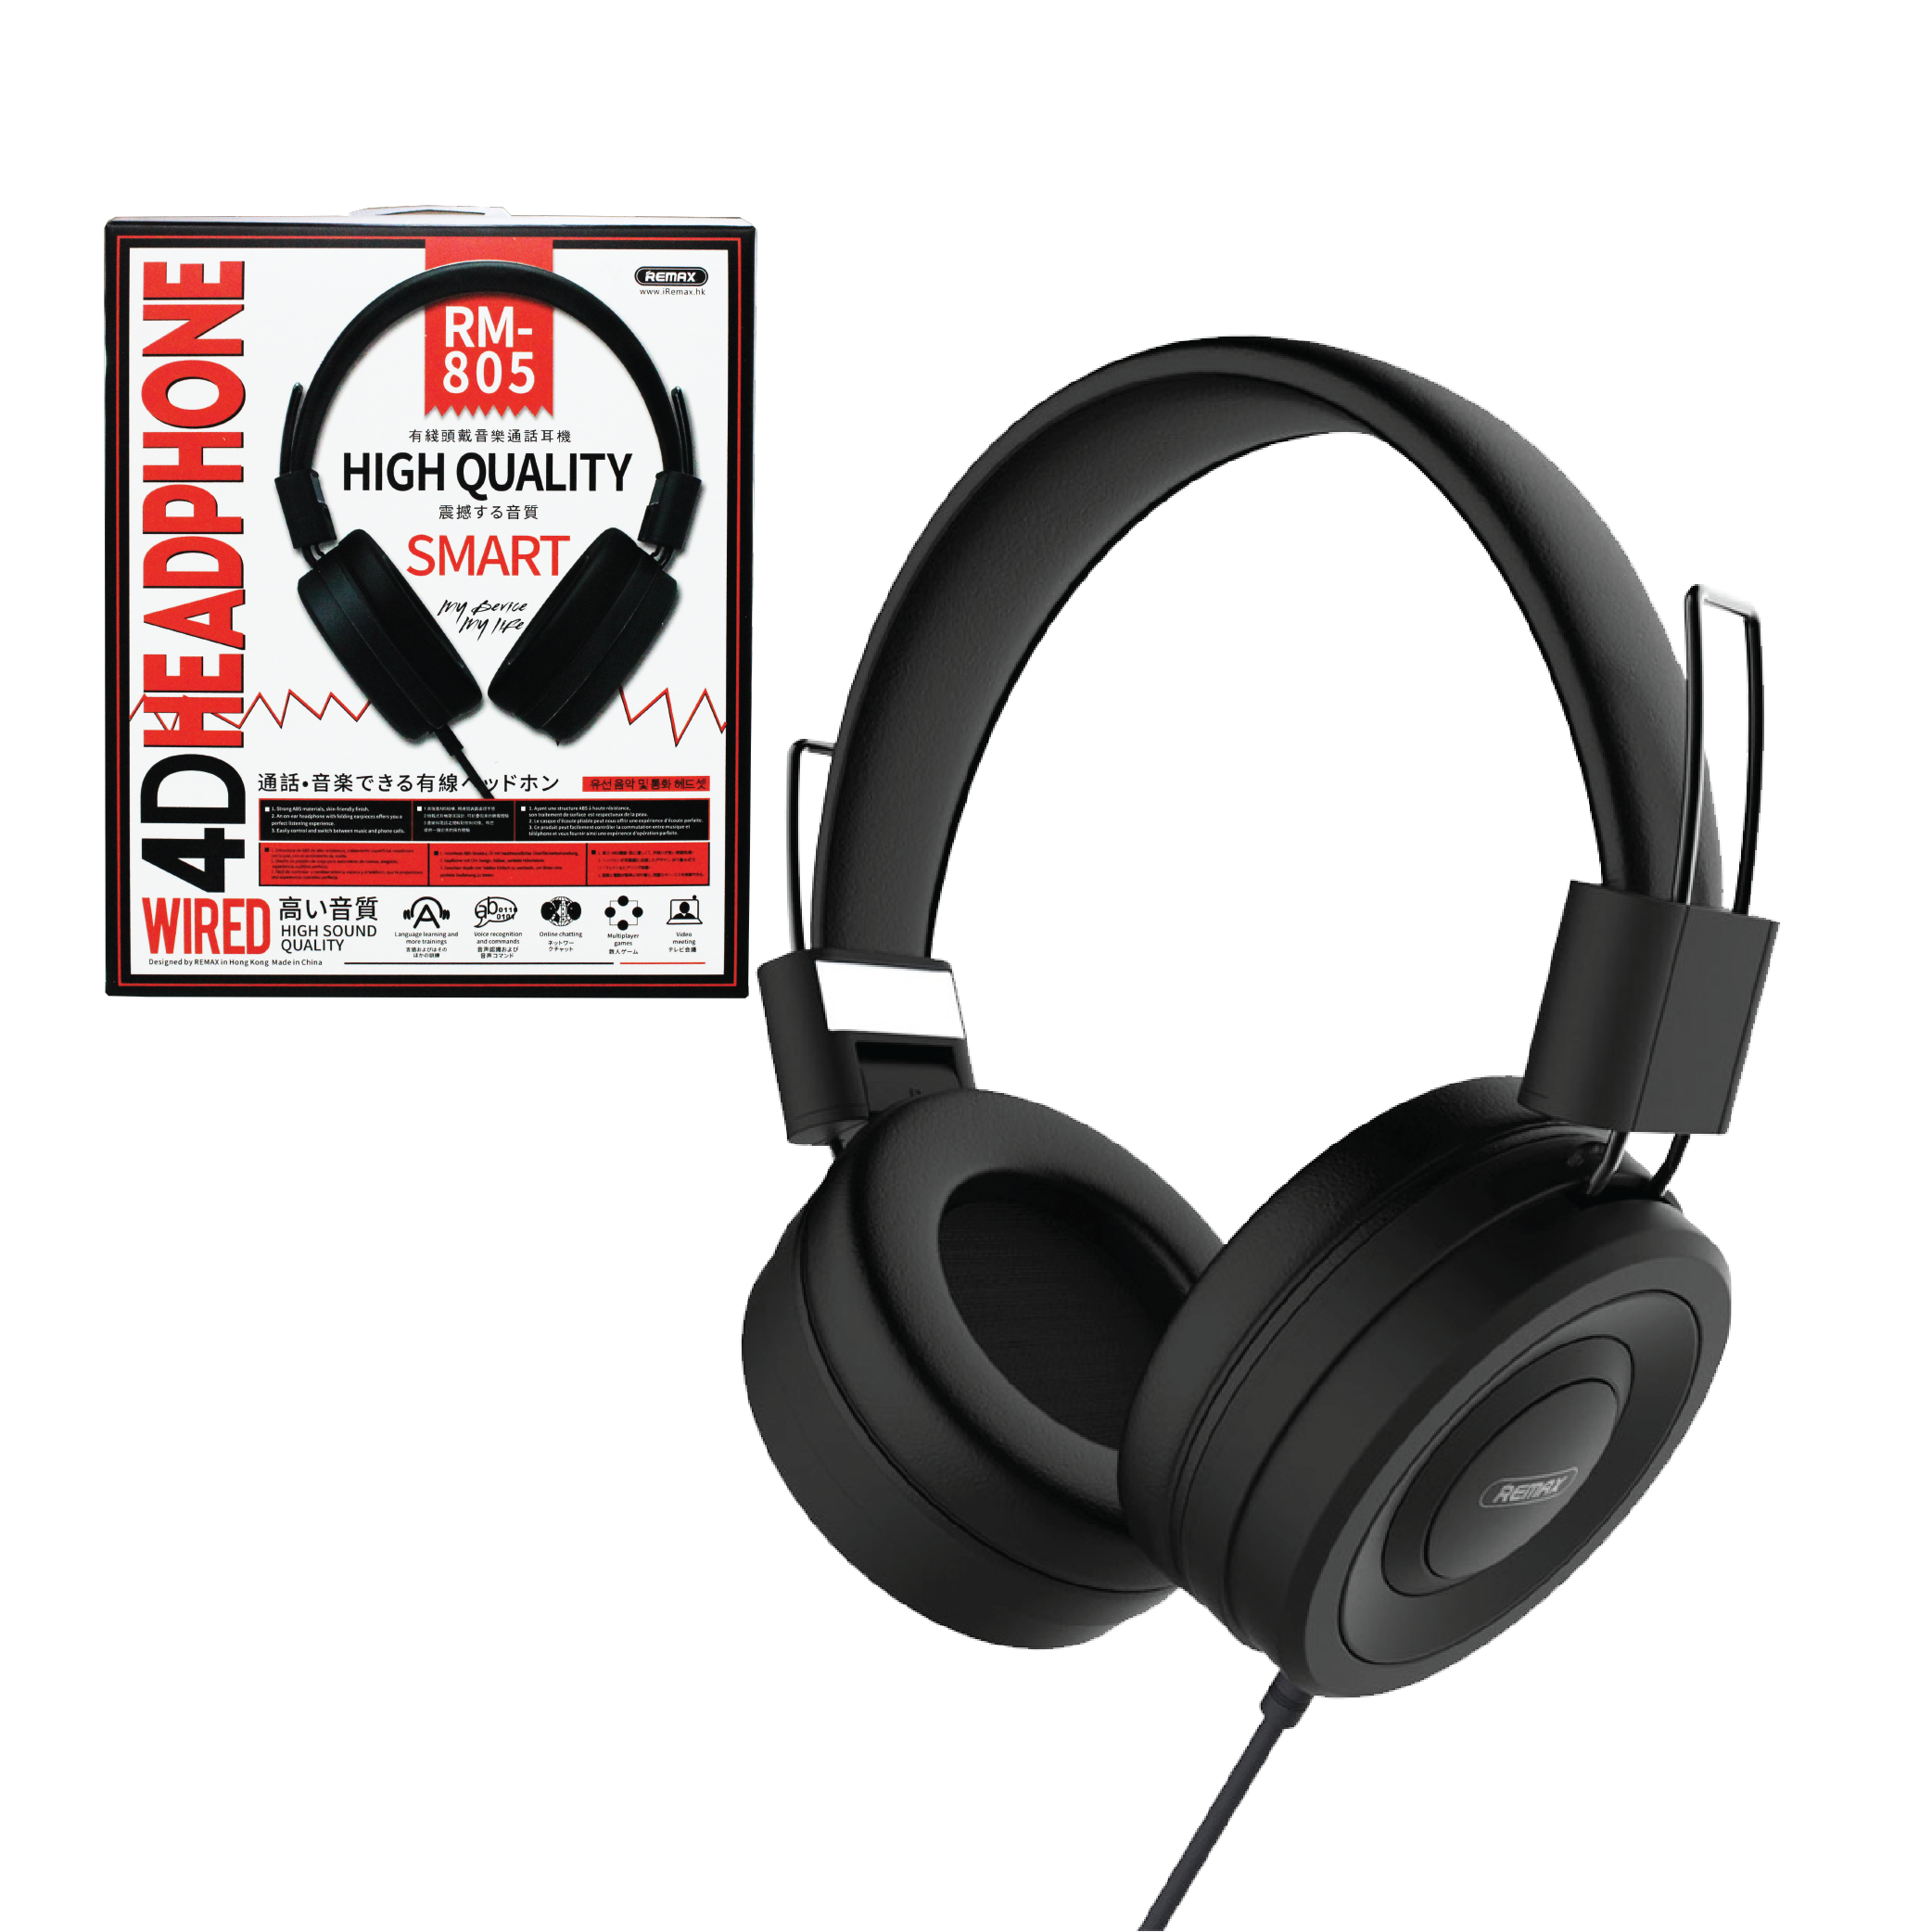 Remax RM-805 Wired Over-Ear Headphone